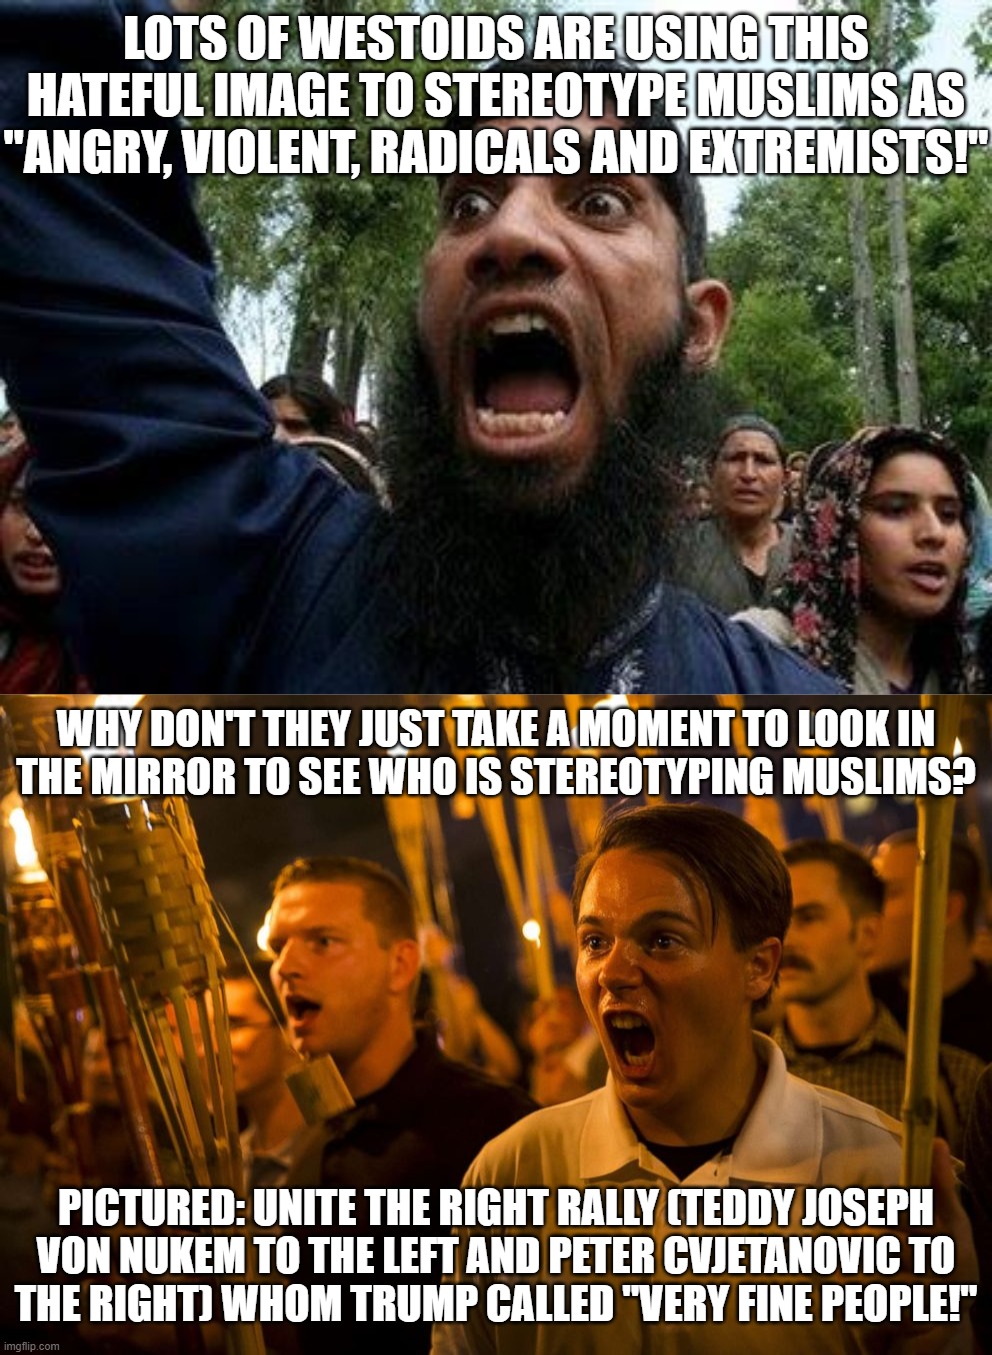 Just to Give You an Idea on (((WHO))) is Using the Hateful "Angry Muslim" Meme and Then Calling Themselves "Civilized Utopia!" | LOTS OF WESTOIDS ARE USING THIS HATEFUL IMAGE TO STEREOTYPE MUSLIMS AS "ANGRY, VIOLENT, RADICALS AND EXTREMISTS!"; WHY DON'T THEY JUST TAKE A MOMENT TO LOOK IN
THE MIRROR TO SEE WHO IS STEREOTYPING MUSLIMS? PICTURED: UNITE THE RIGHT RALLY (TEDDY JOSEPH
VON NUKEM TO THE LEFT AND PETER CVJETANOVIC TO
THE RIGHT) WHOM TRUMP CALLED "VERY FINE PEOPLE!" | image tagged in angry muslim,the civilized west,charlottesville,terrorism,terrorist,radical | made w/ Imgflip meme maker